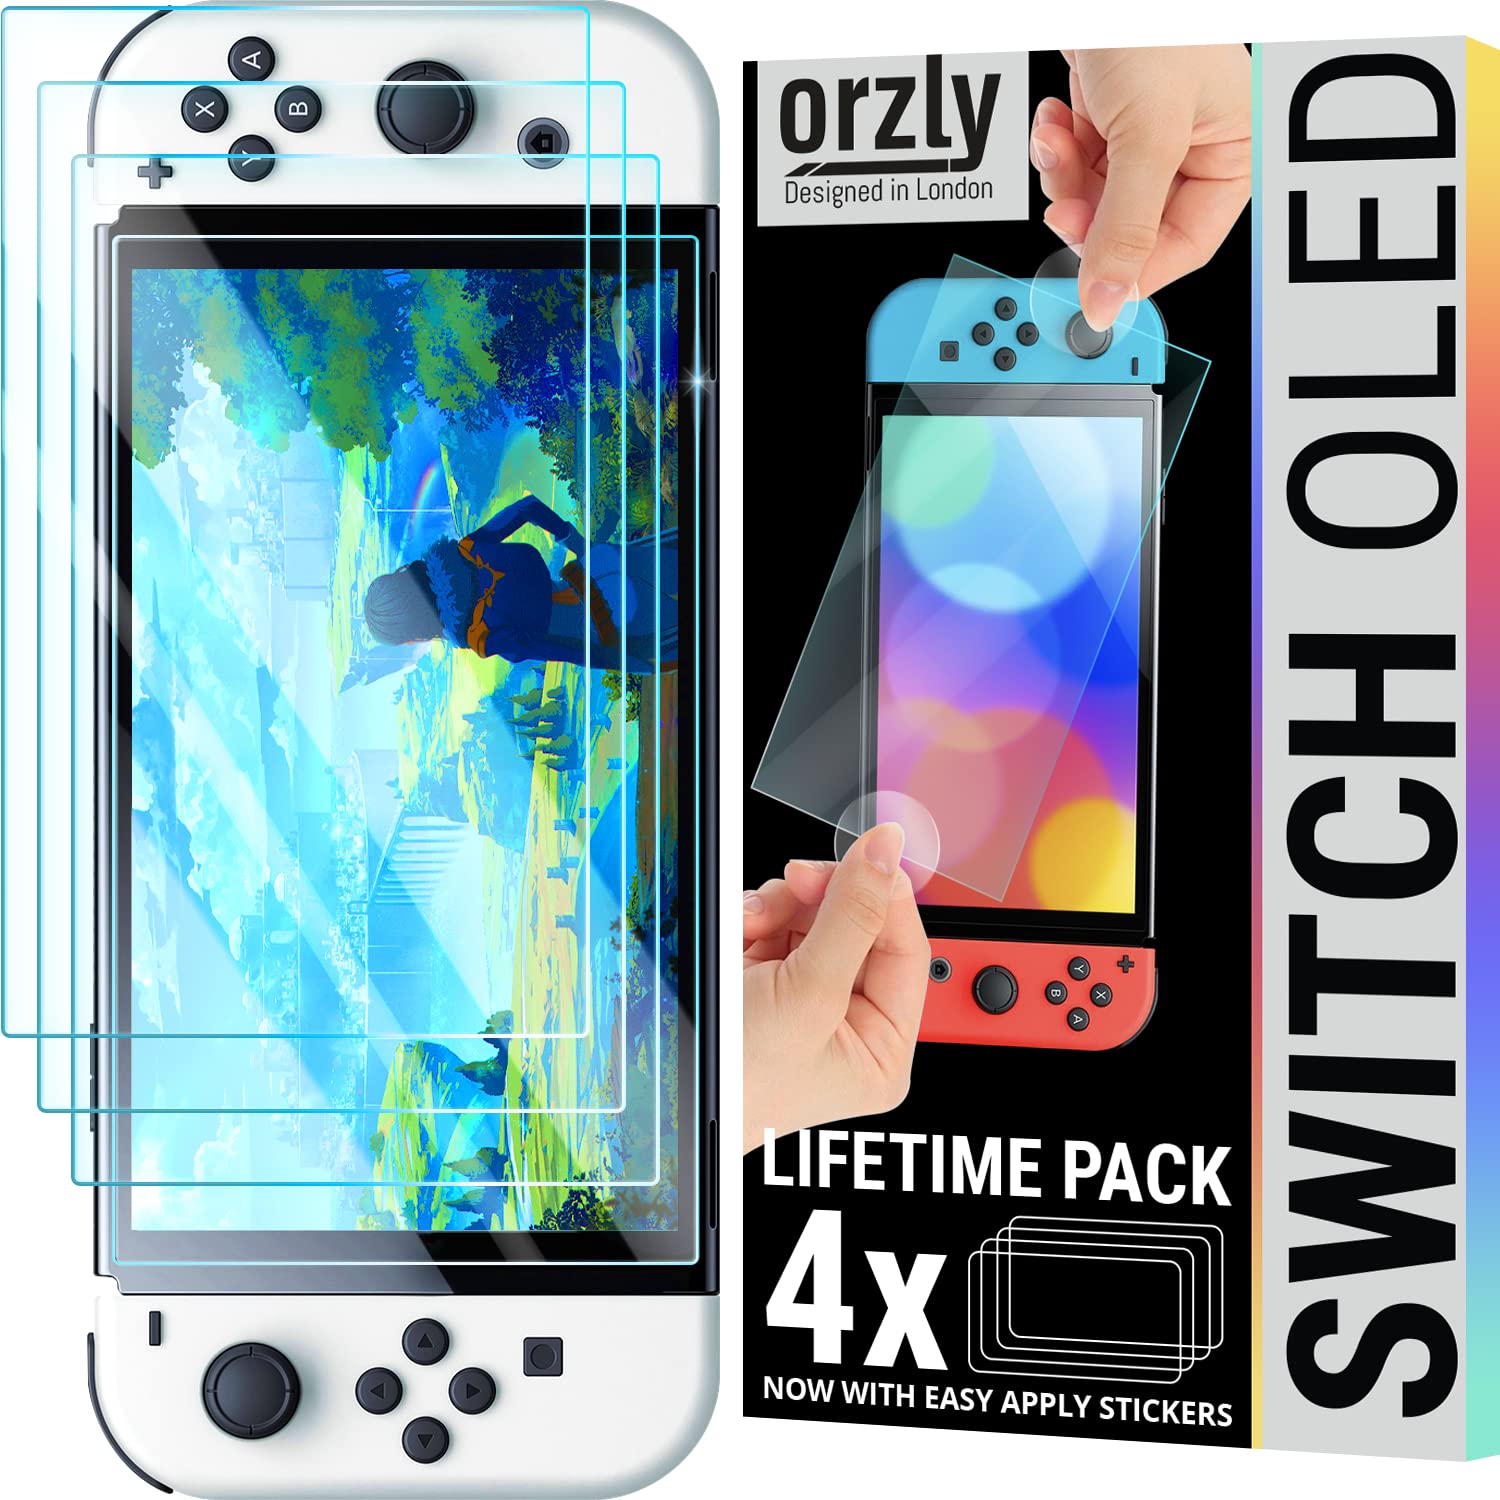 Orzly screen protectors bundle for Nintendo switch OLED console 2021 model - 4 Pack tempered glass with easy installation accessories Lifetime edition